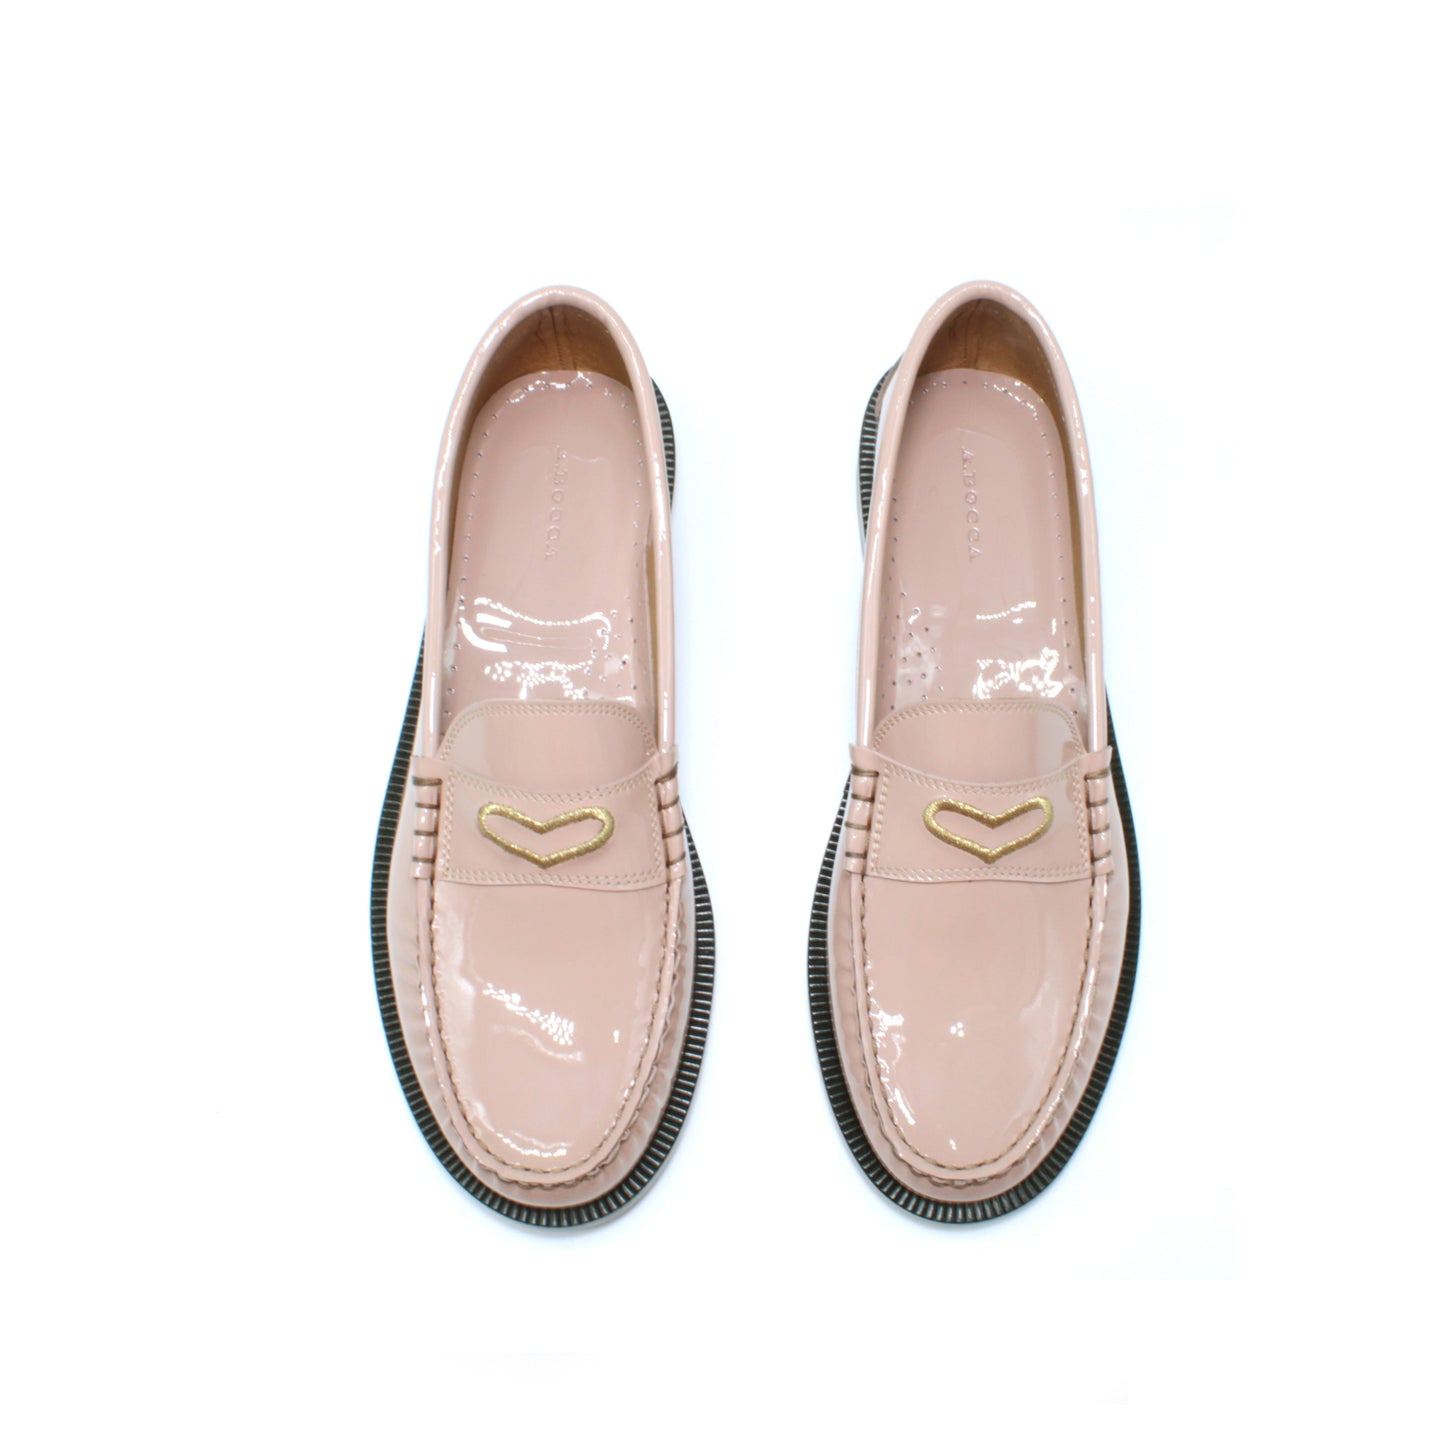 Loafer in tutu color patent leather